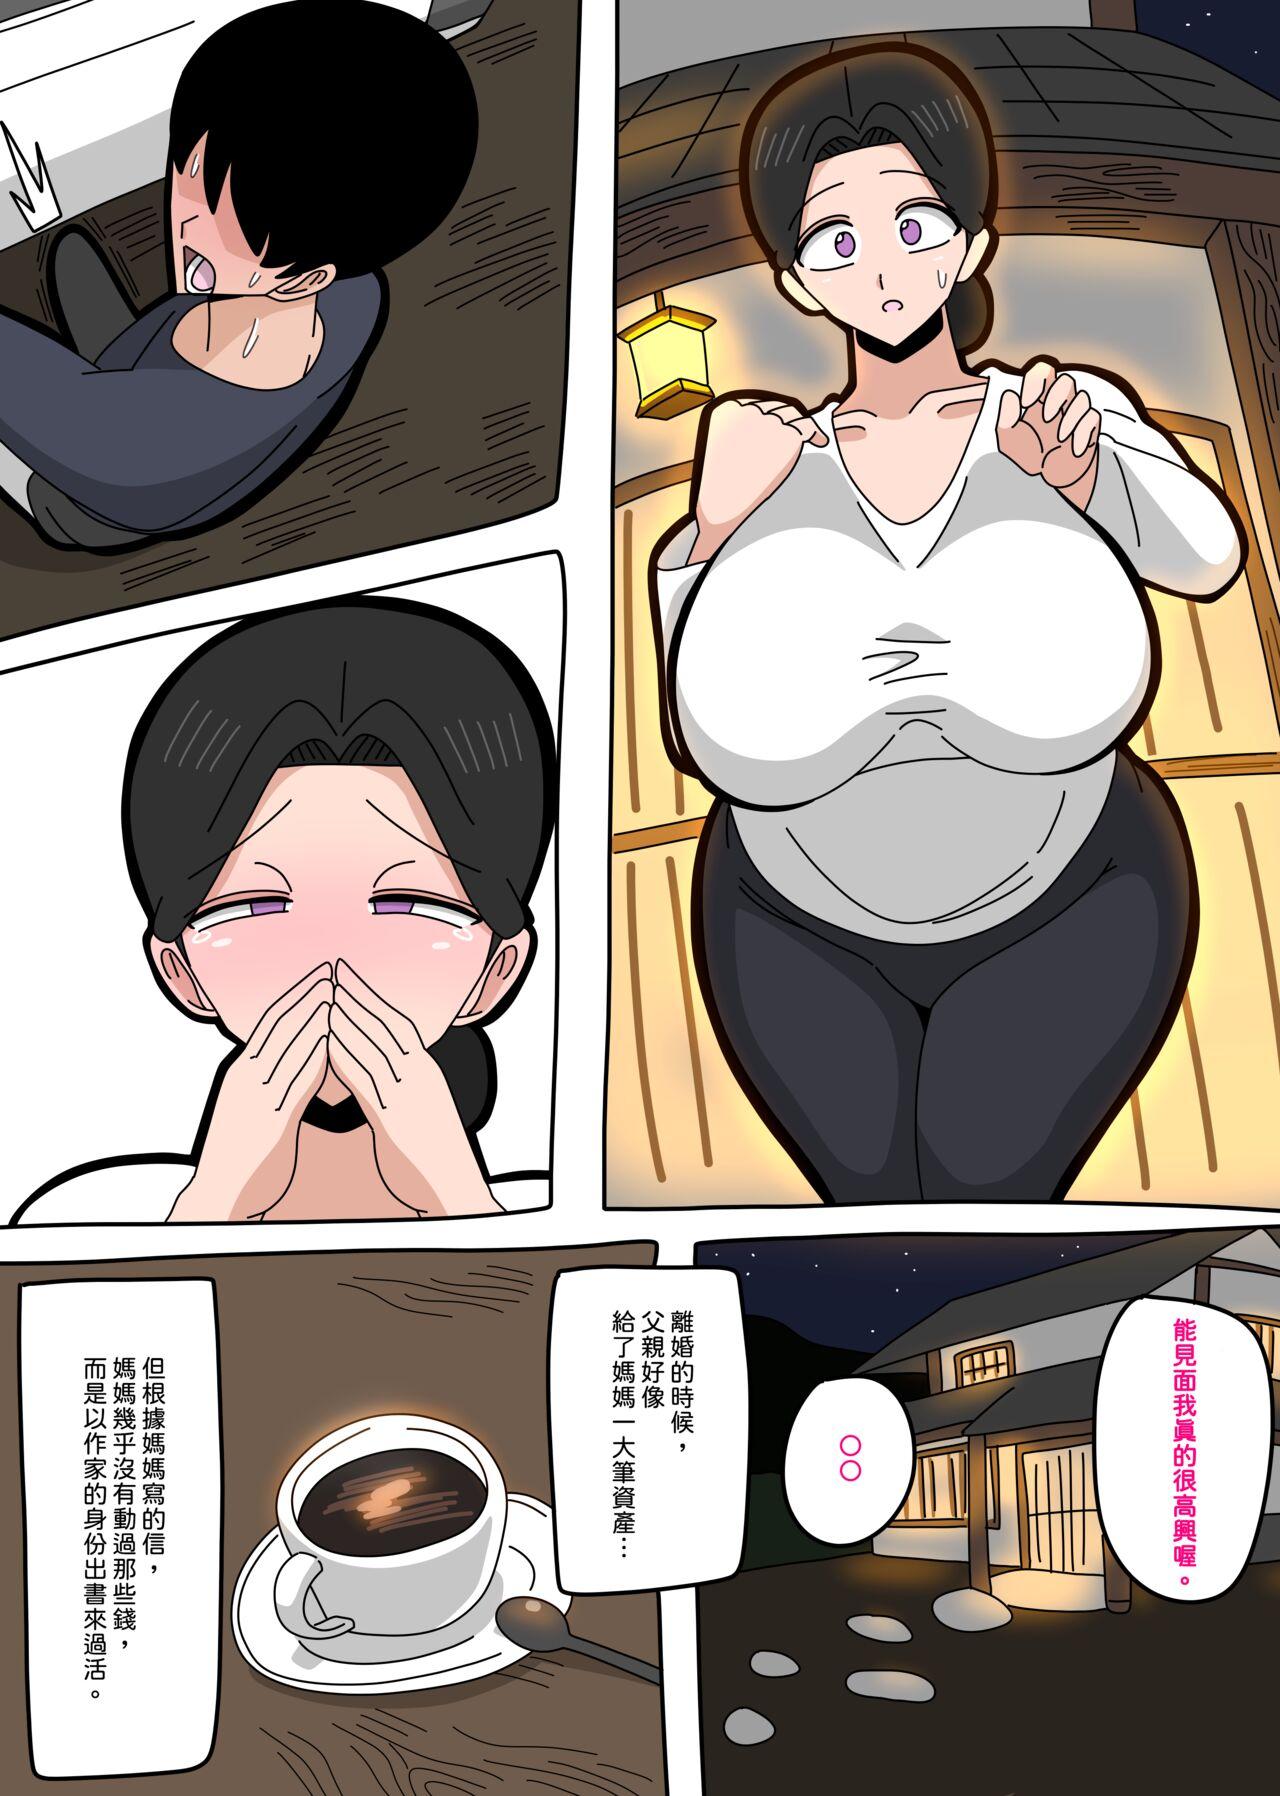 Chica [18master] 2023-5-24 Meeting mom again after a long separation | 與媽媽重逢… [Chinese][興趣使然的個人機翻] - Original Erotic - Picture 2